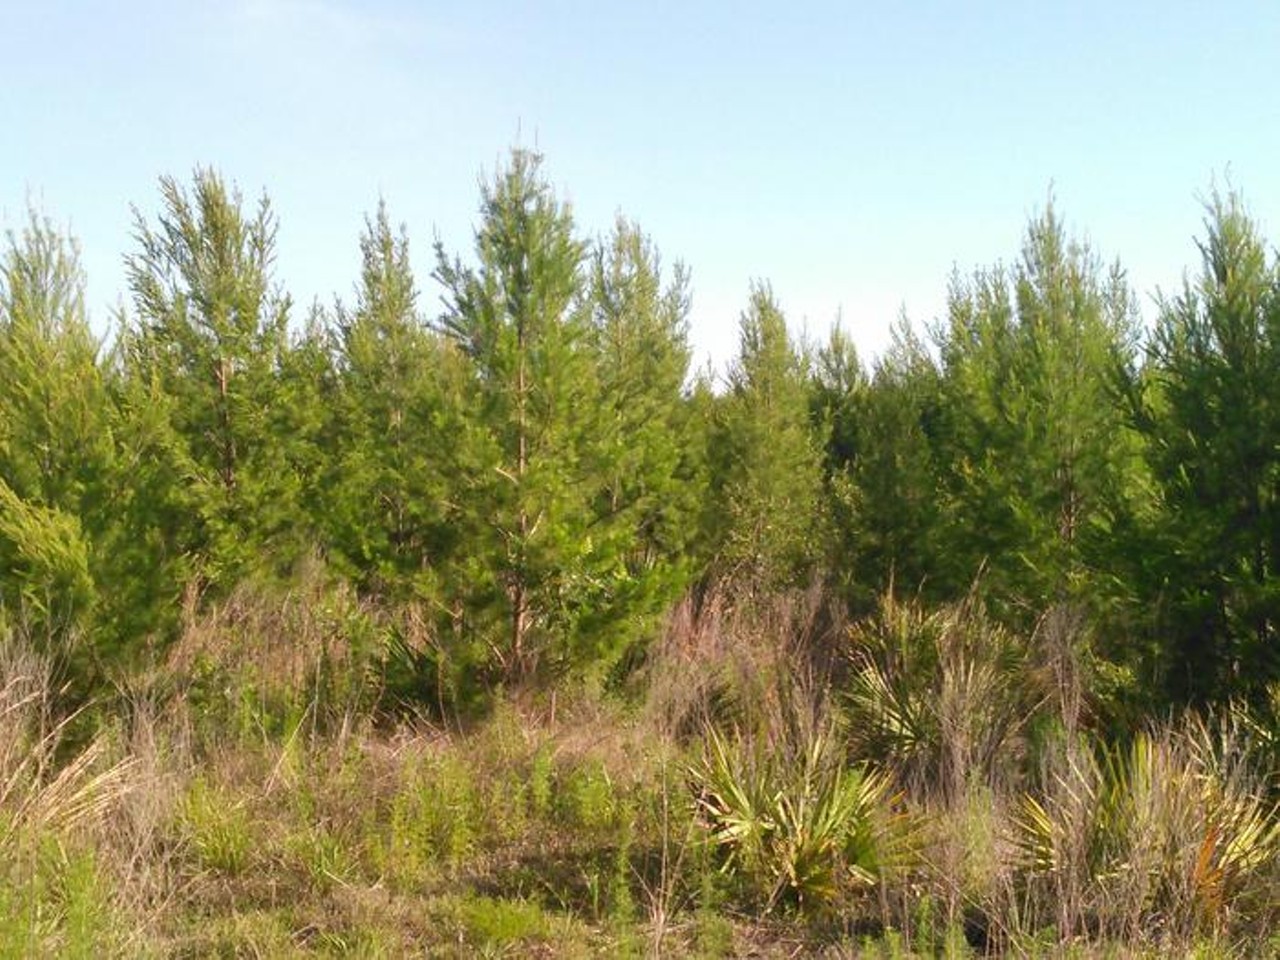 Ocala National Forest Christmas Tree U-Pick 
40 Silver Springs
Dates open: Nov. 25 through Dec. 24
Cost: $10 per tree, maximum of 5 trees per permit
Cut down your very own Christmas tree at the Ocala National Forest. All that's required is a $5 permit that can be purchased online.